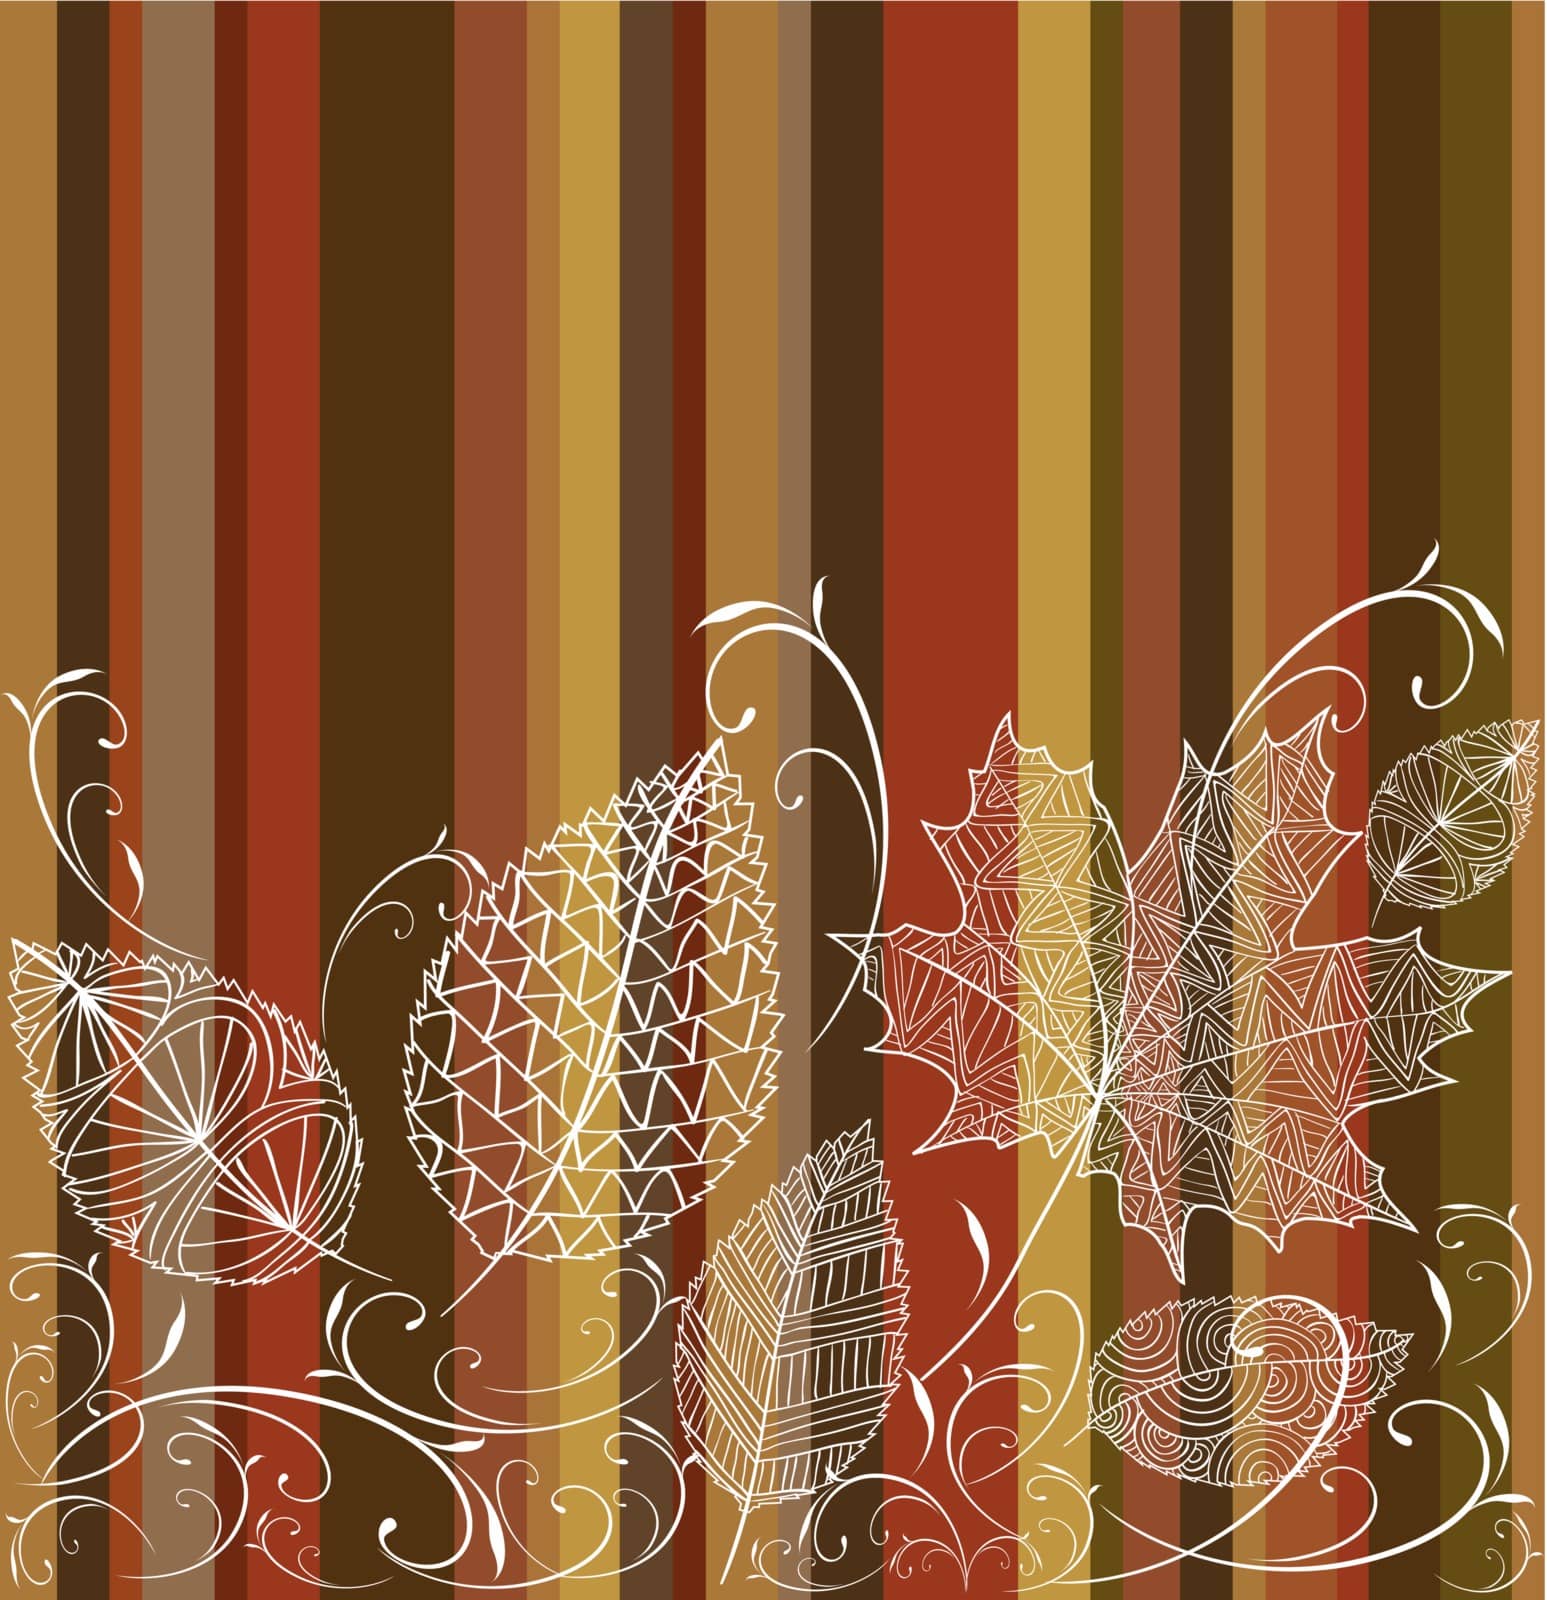 Vintage transparent autumn tree leaves seamless pattern background. EPS10 vector file with transparency organized in layers for easy editing.